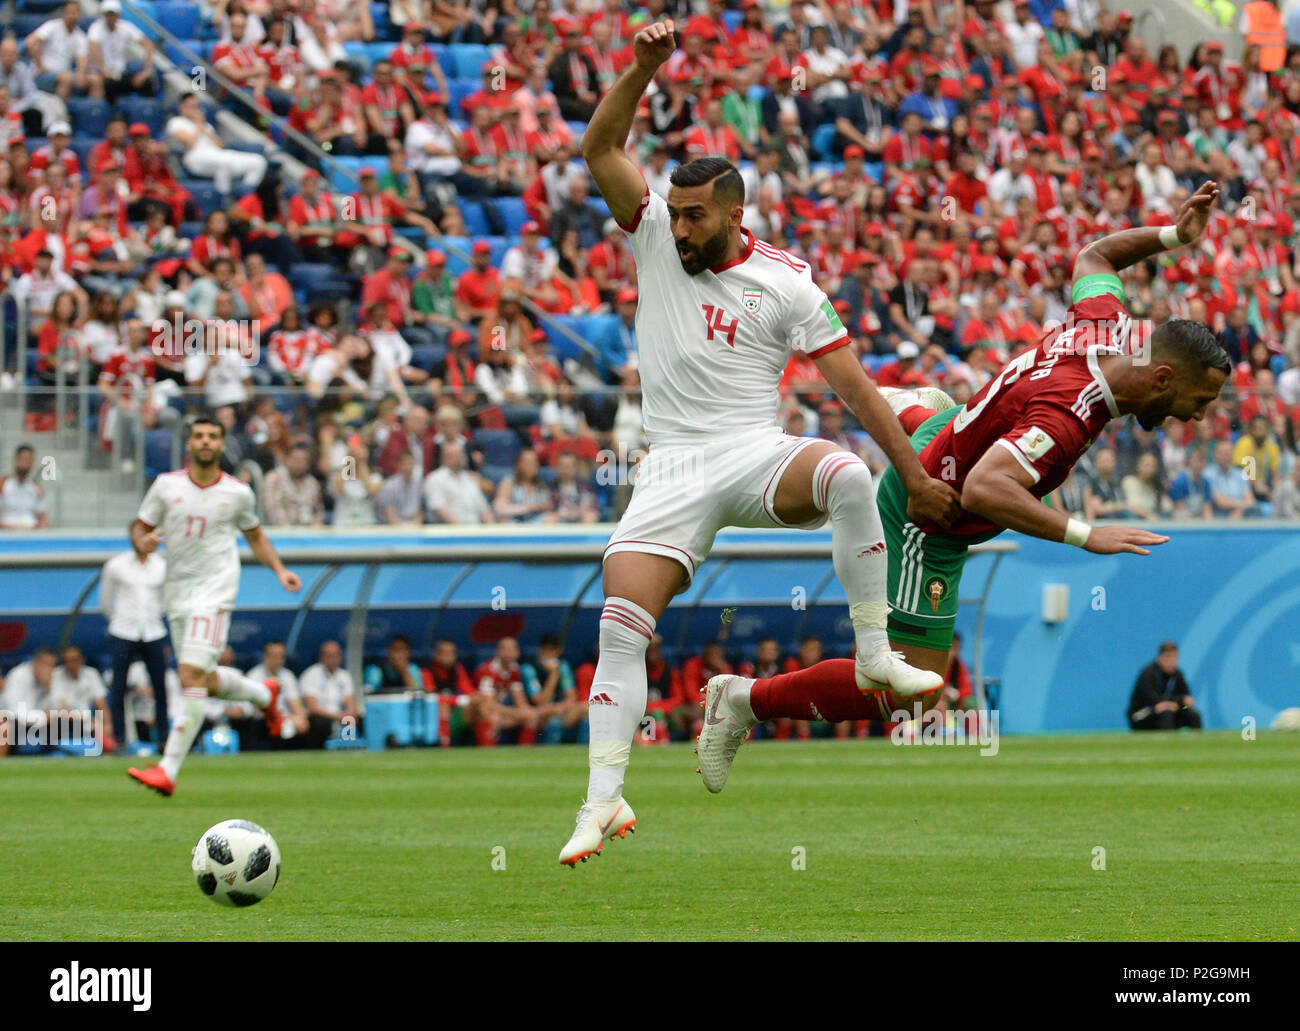 Sochi, Russia. 15th Jun, 2018. Russia, St. Petersburg, on June 15, 2018. 2018 FIFA World Cup Russia. The match of the group stage of the FIFA World Cup - 2018 between national teams of Morocco and Iran. In the picture: (from left to right) player of Iran national team GHODDOS Saman and player of Morocco national team Medhi Benatia. (Photo: Andrey Pronin/Fotoarena) Stock Photo